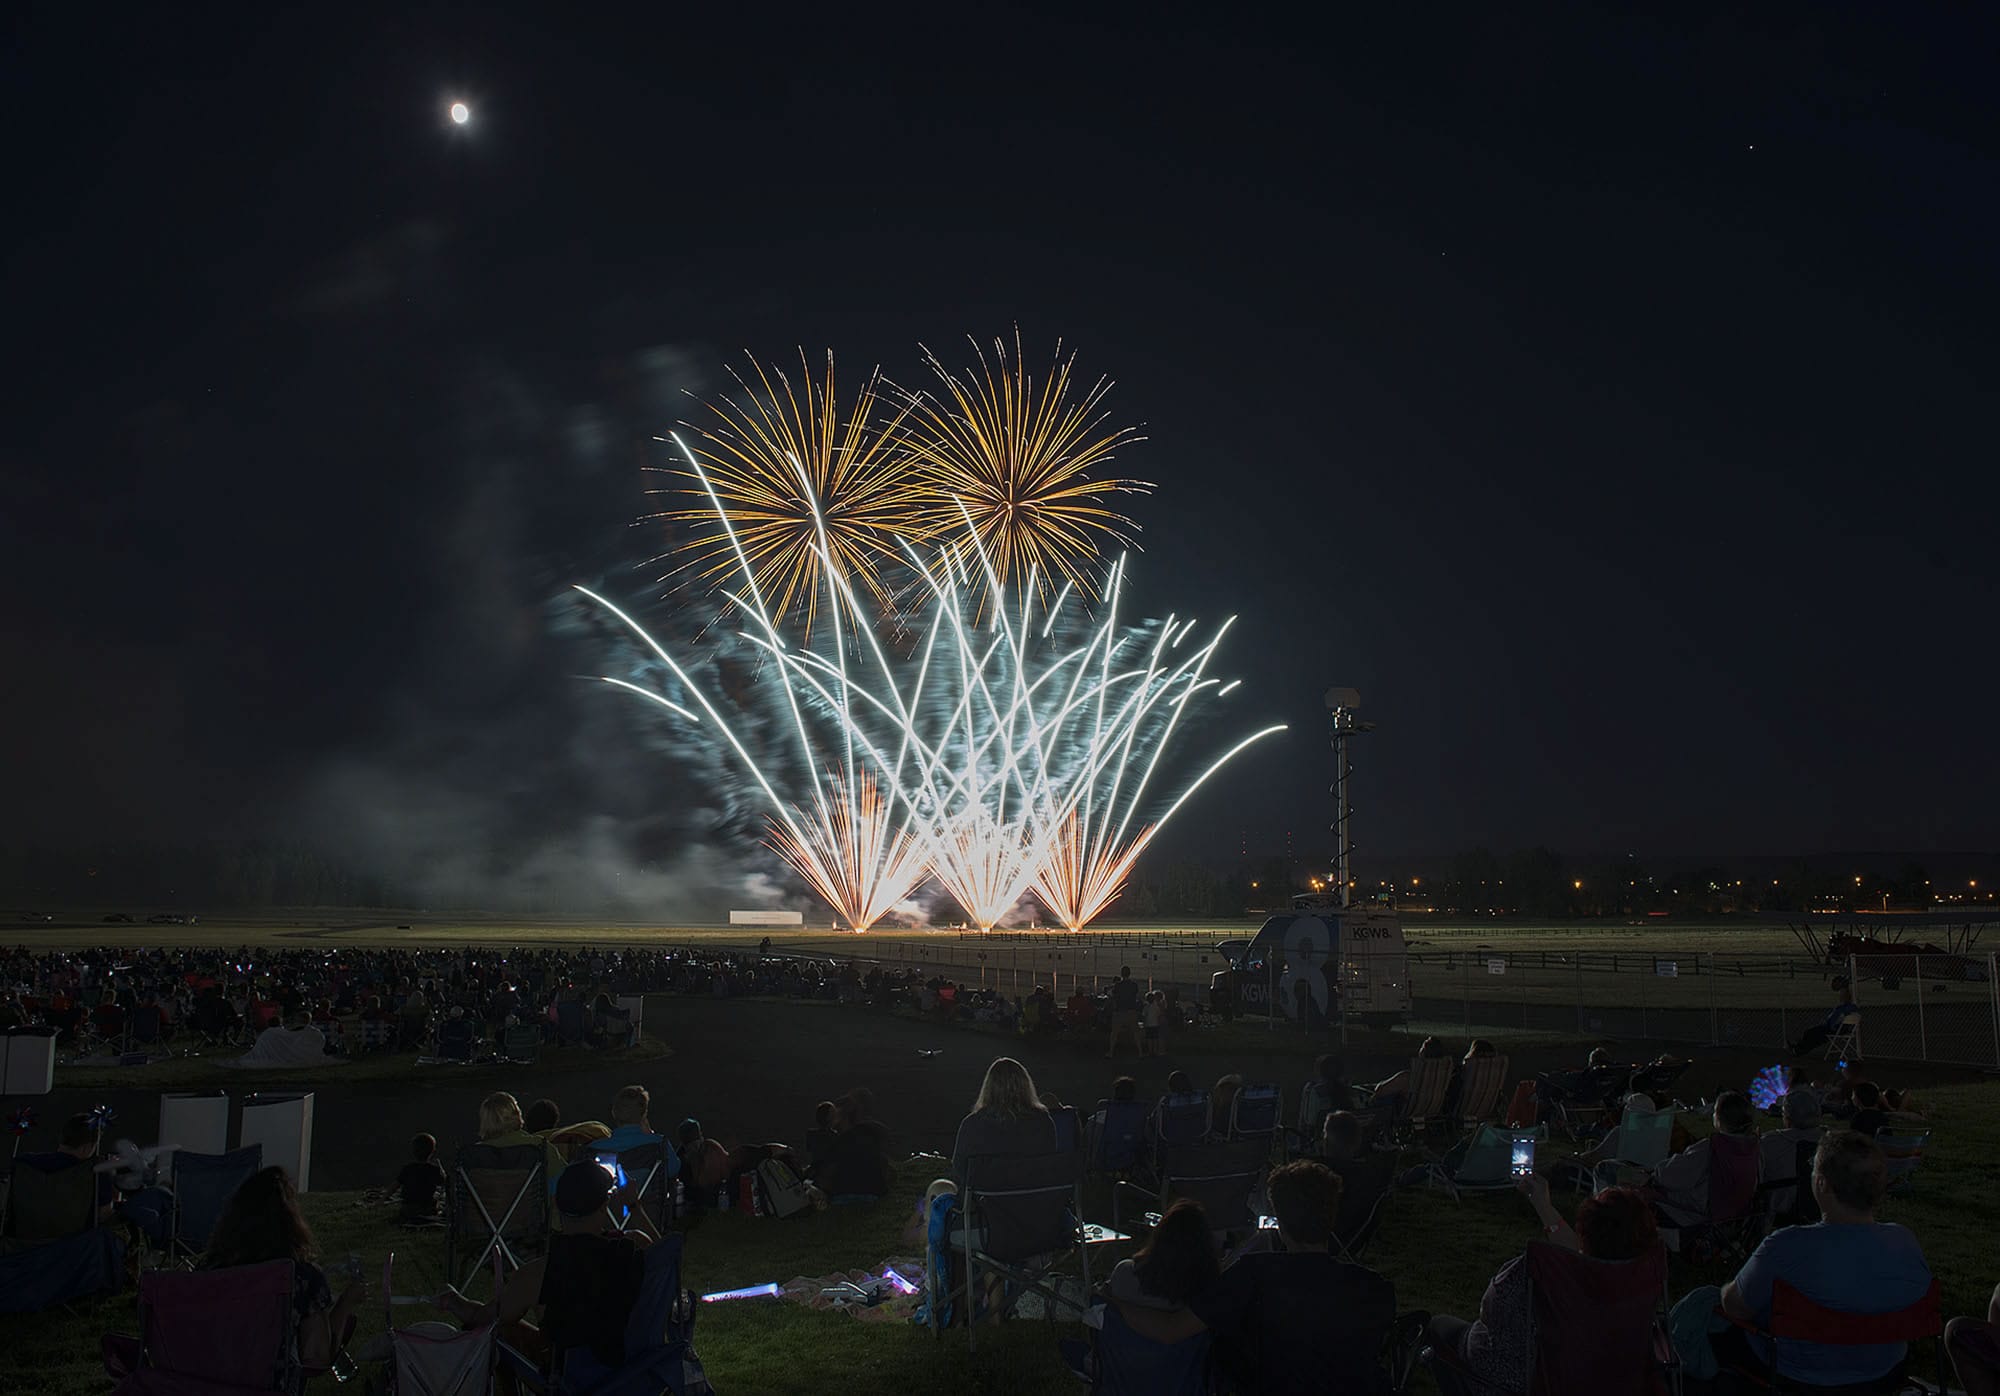 Fireworks light the night sky to the delight of the crowd at Fort Vancouver National Historic Site on Tuesday evening.